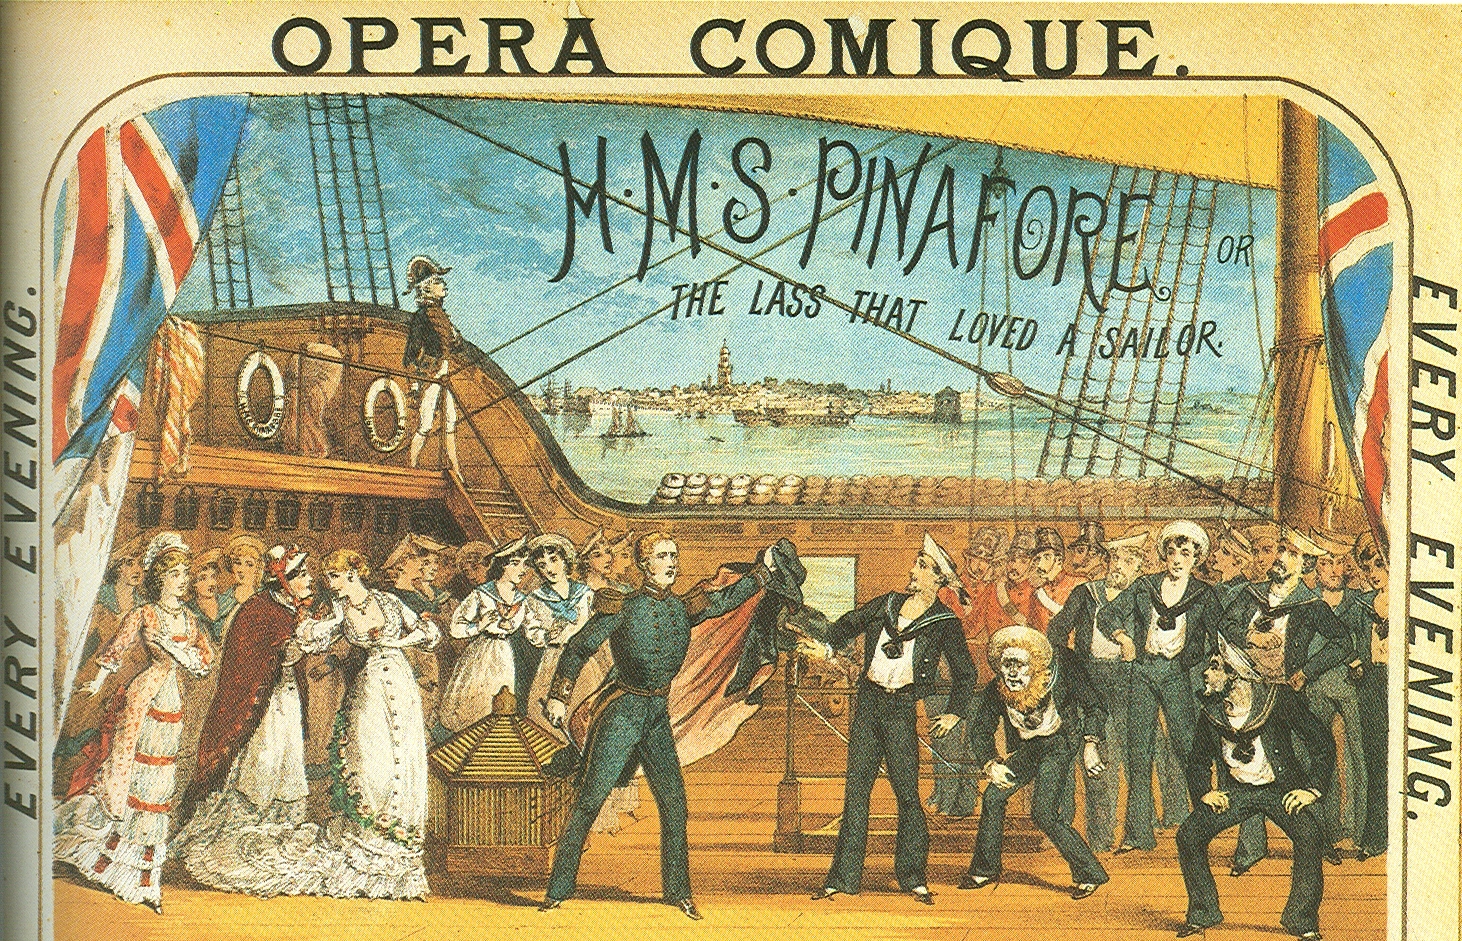 Poster illustration from original 1878 production of "H.M.S. Pinafore" at the Opera Comique.